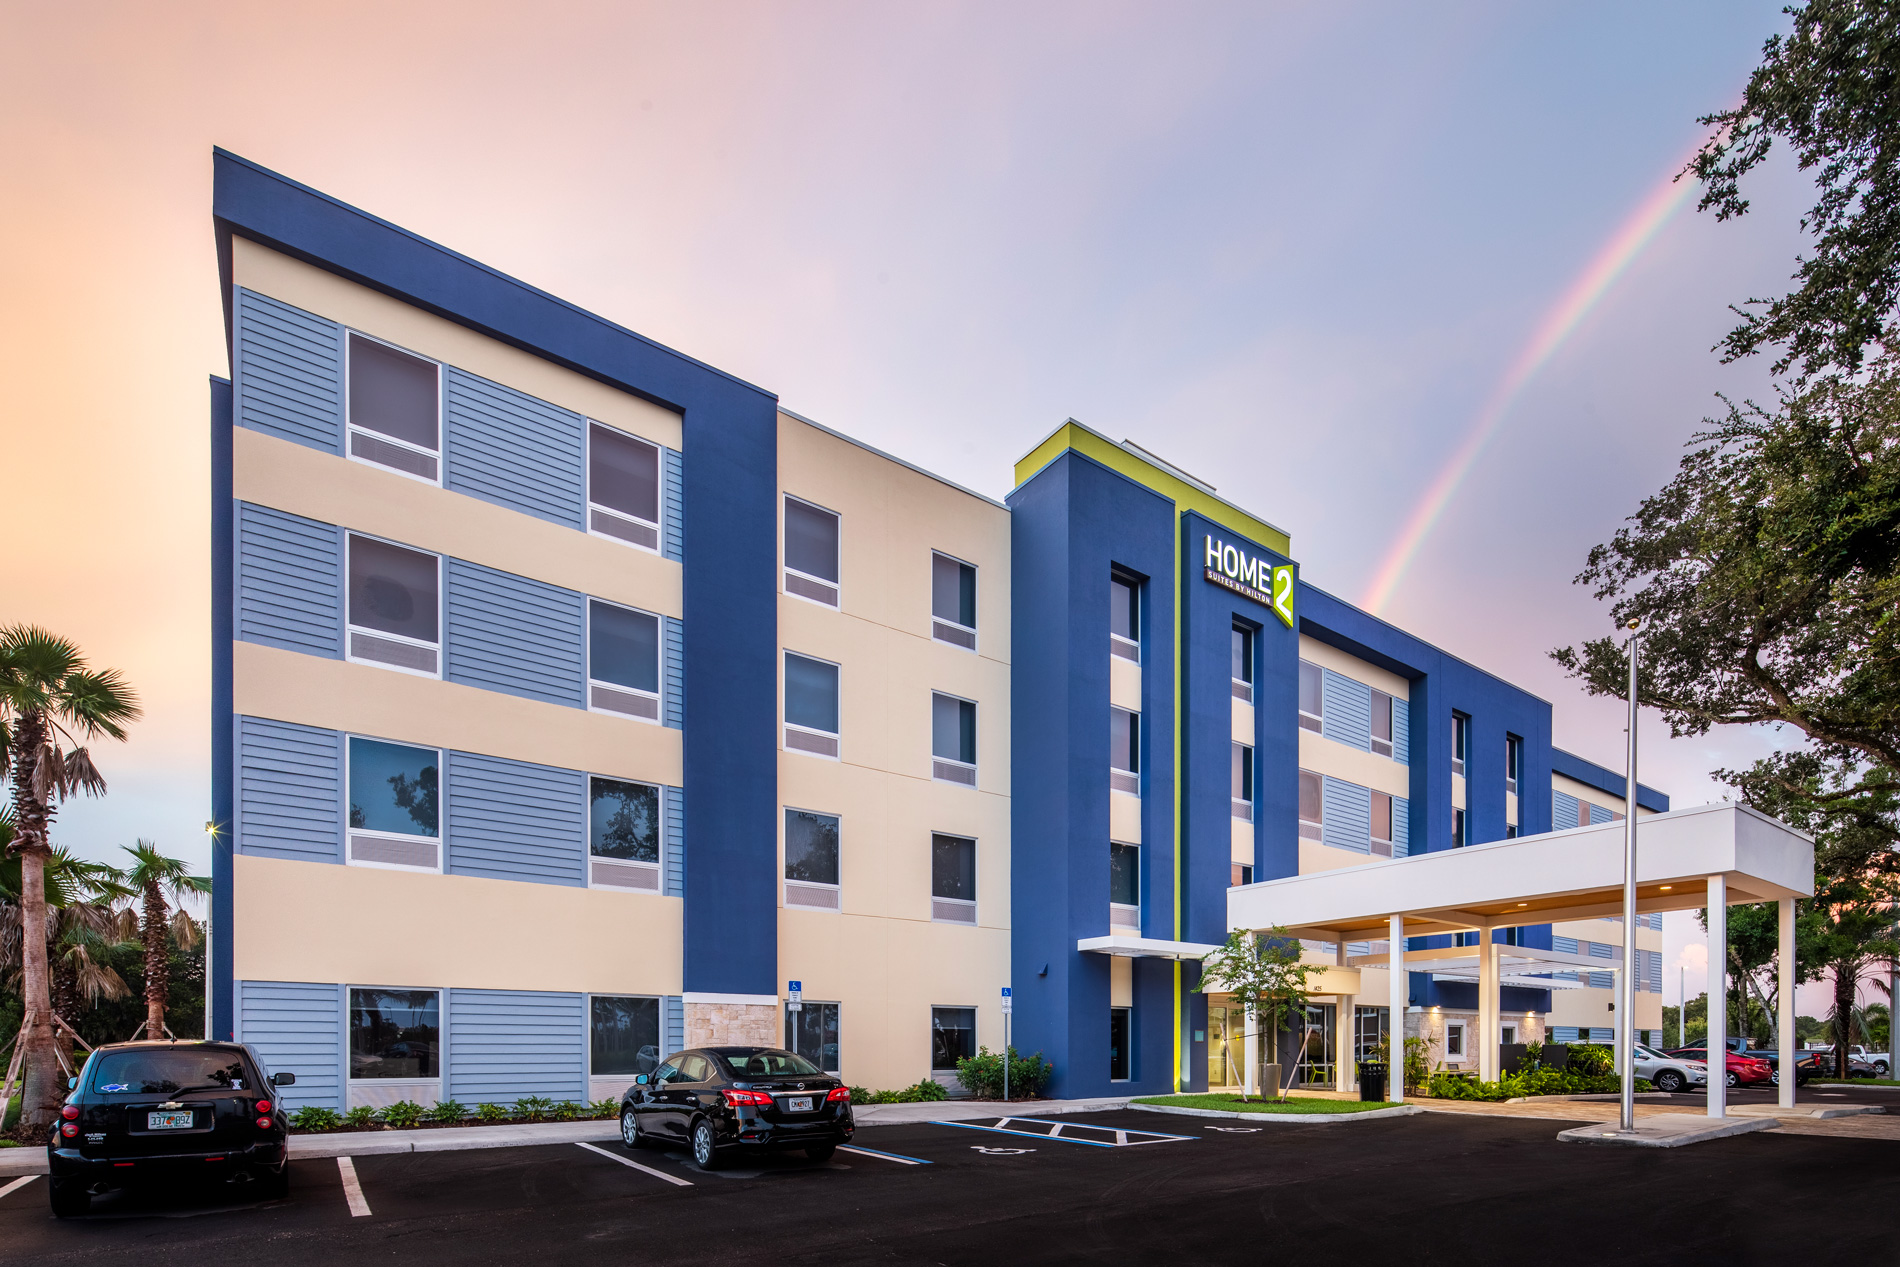 Home 2 Suites | Palm Bay, FL | Hospitality Architects & Designers | Cuhaci Peterson 22